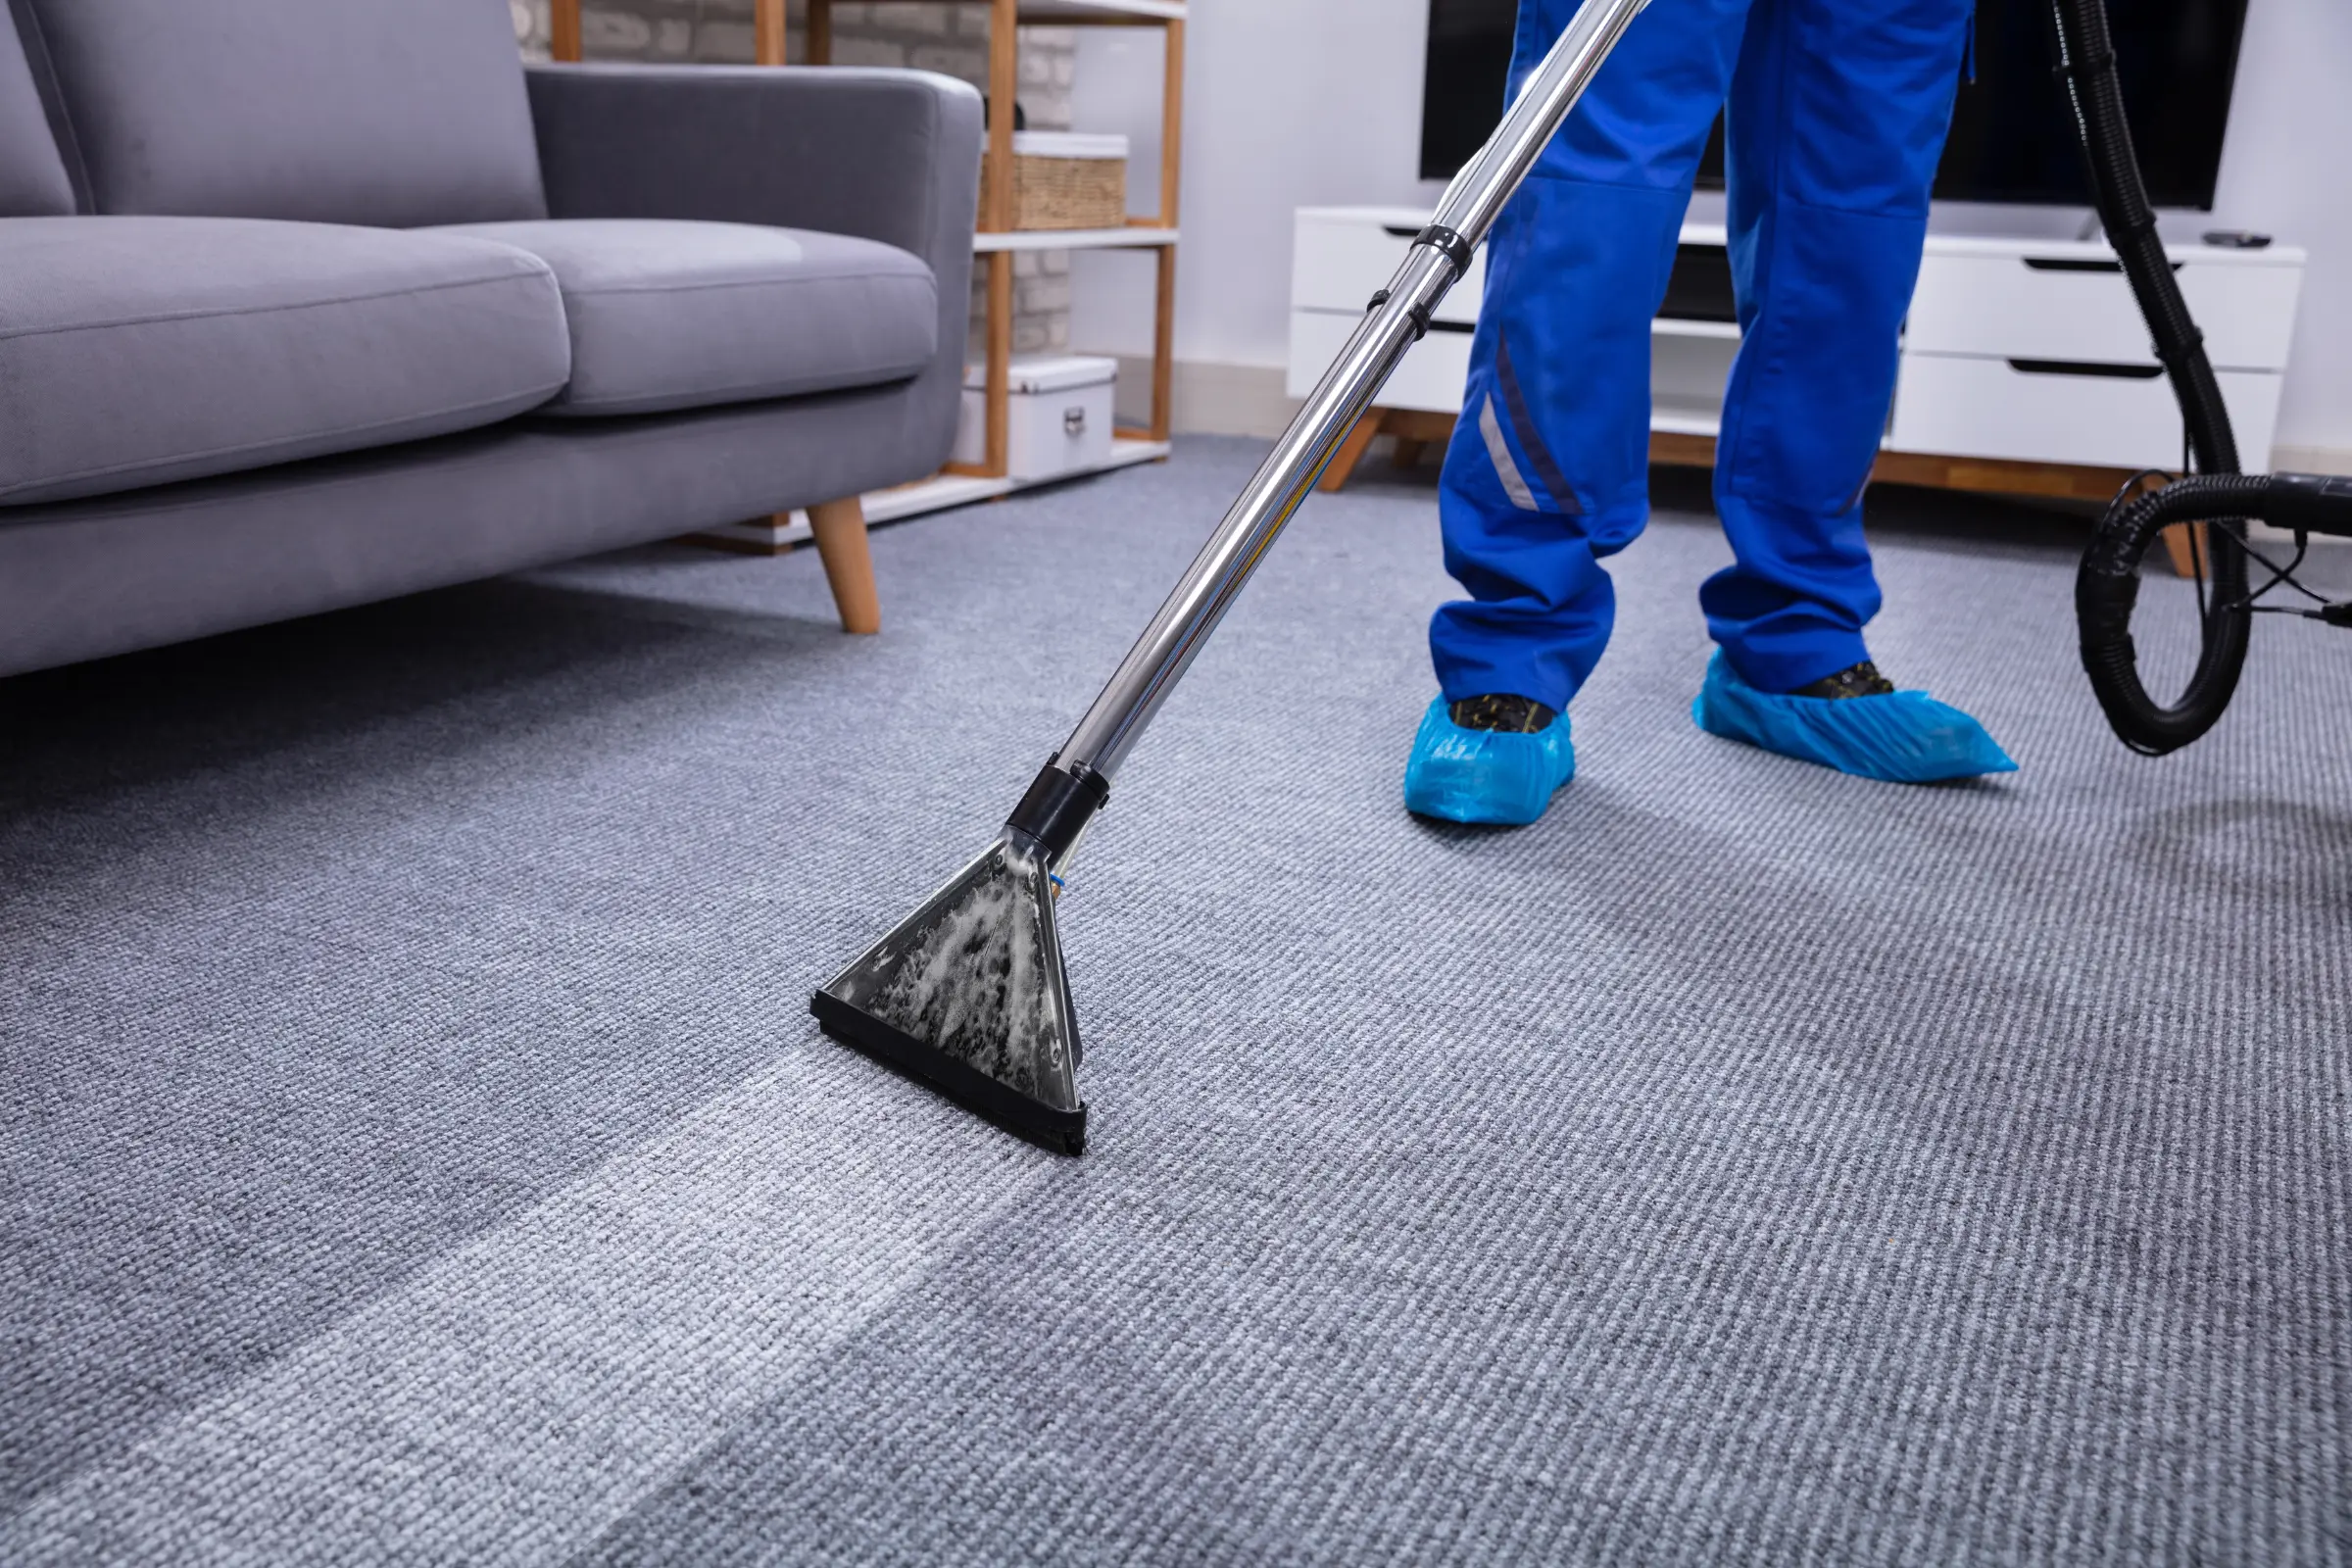 Carpet and Upholstery Cleaning Company London - Klense 05